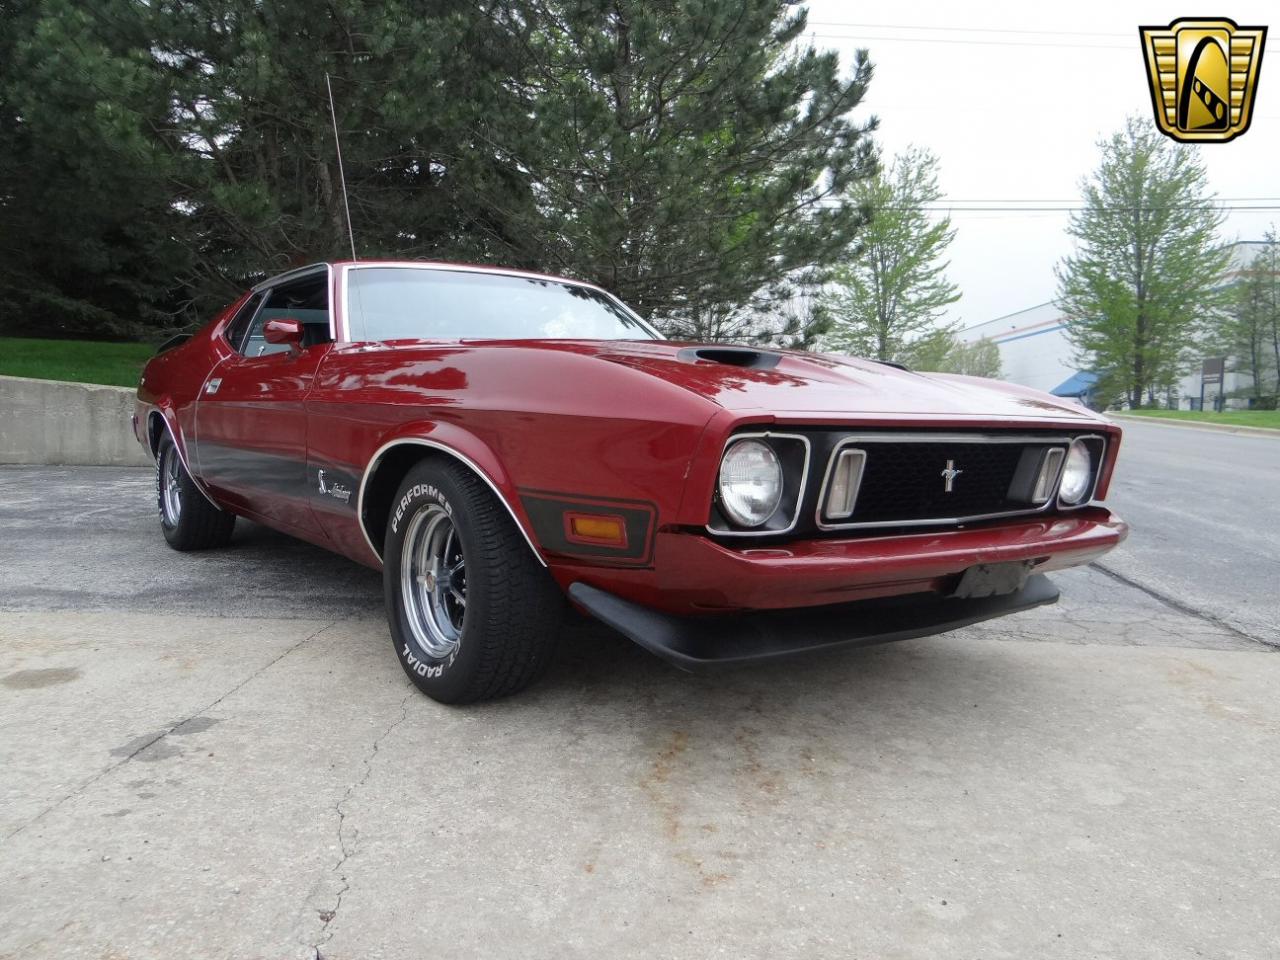 1973 Ford Mustang Mach 1 93325 Miles Burgundy Coupe 429 CID V8 ...